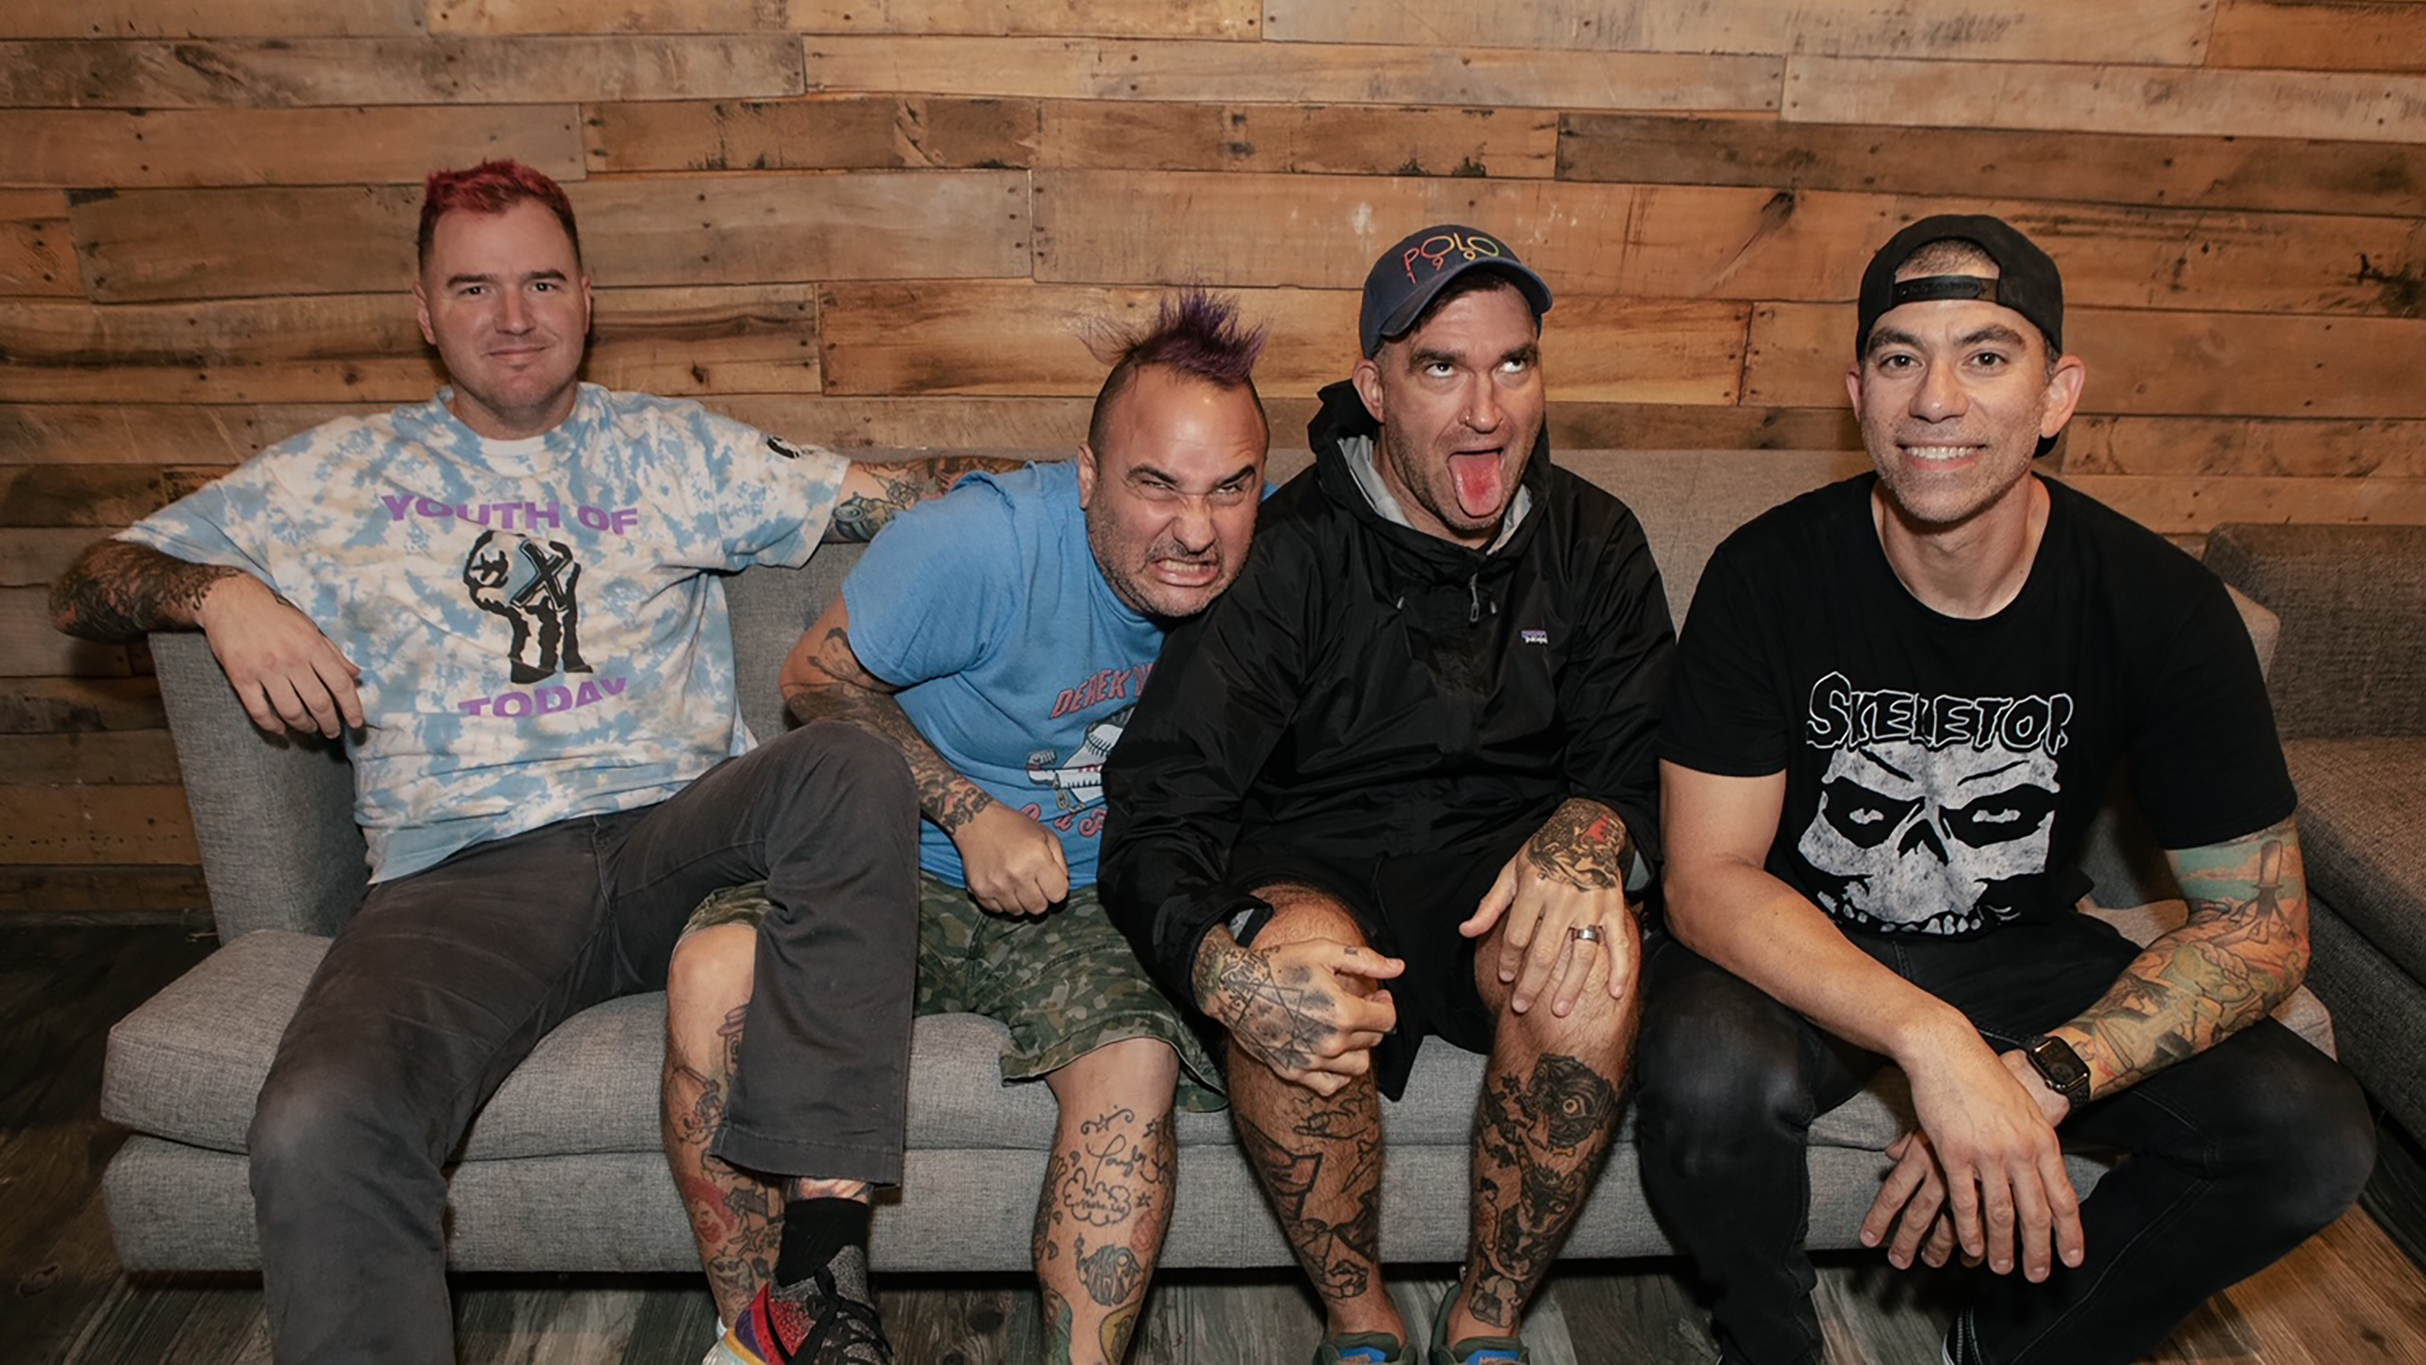 New Found Glory: Catalyst 20 Years Later presented by FM 101.9